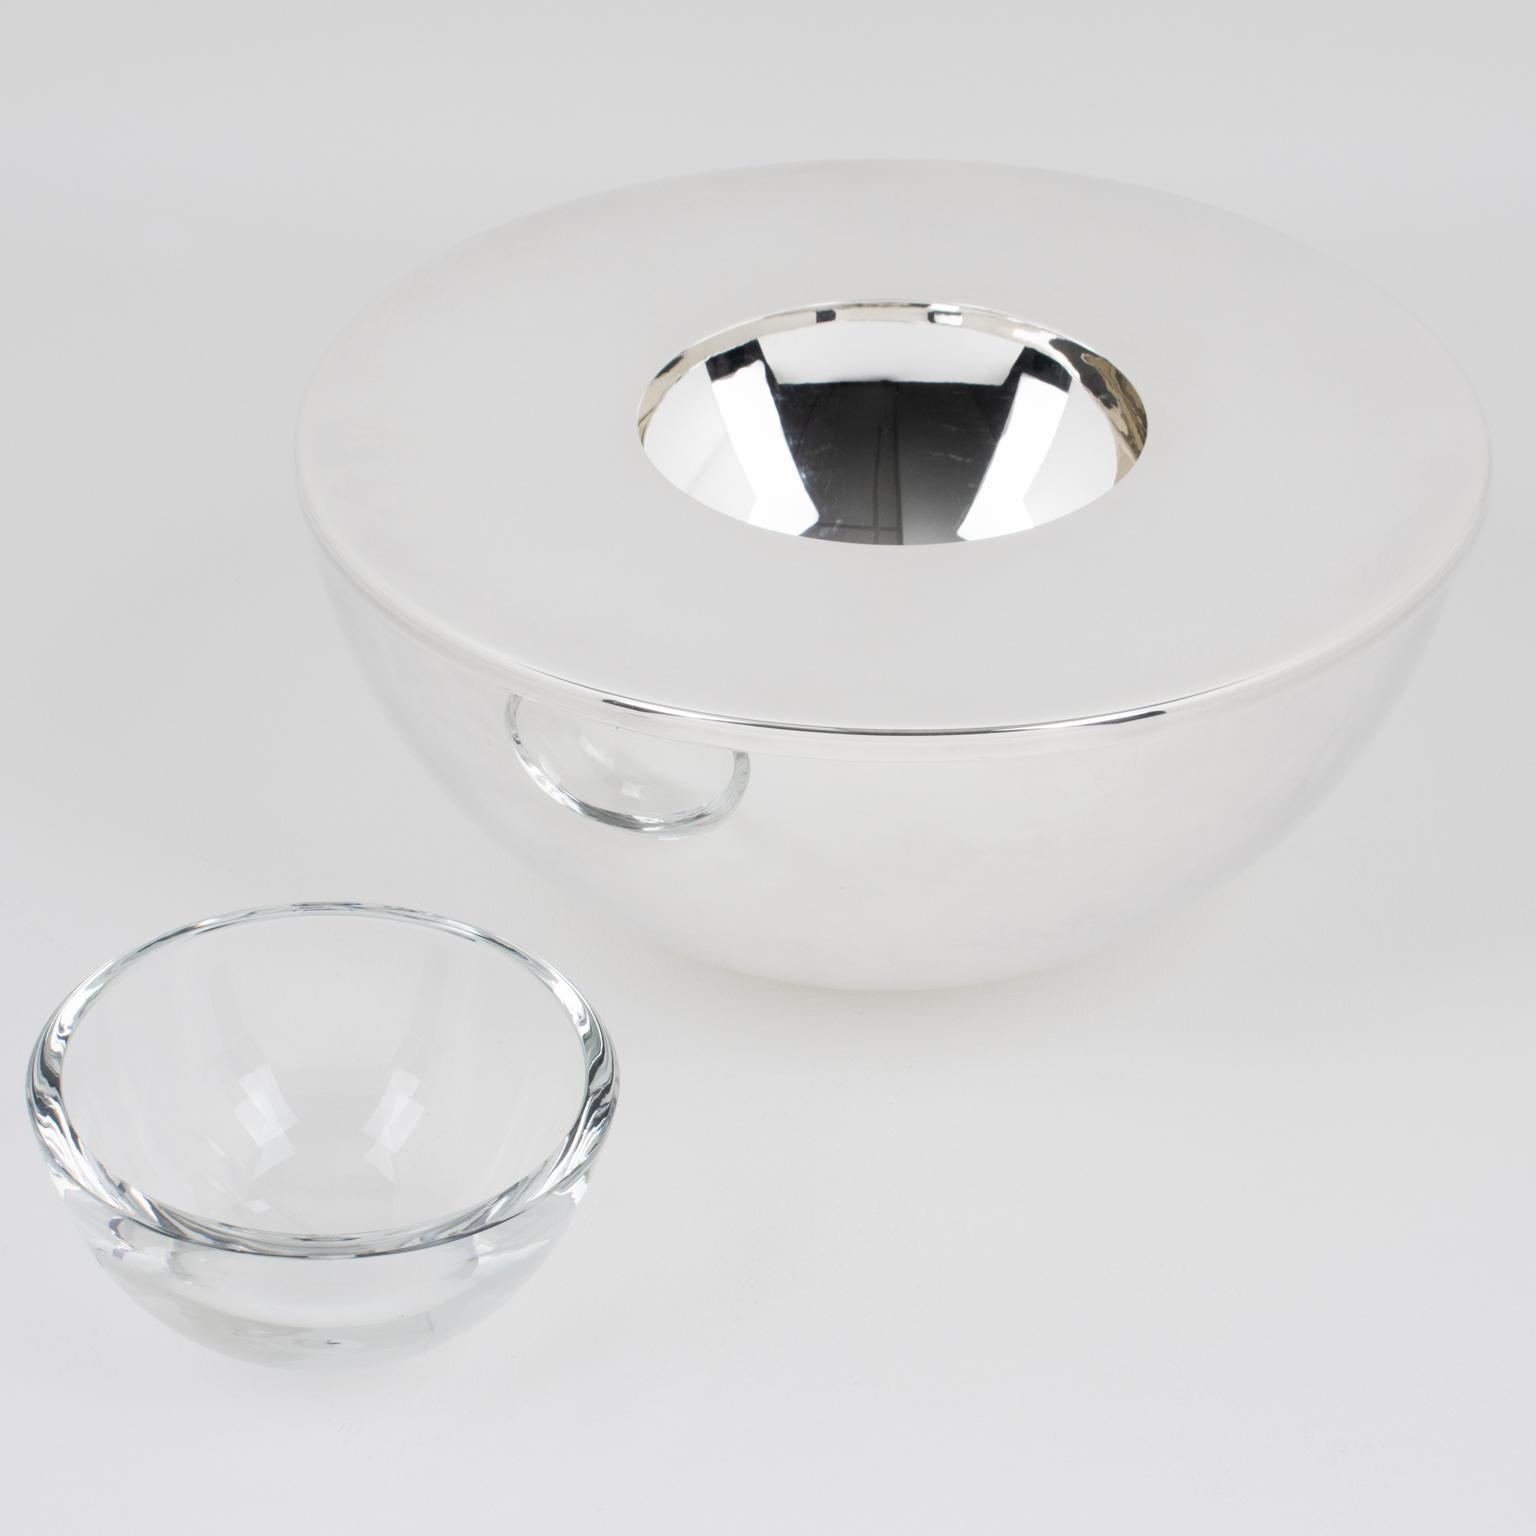 Swid Powell for Calvin Klein Silver Plate and Crystal Caviar Bowl Dish Chiller In Excellent Condition For Sale In Atlanta, GA